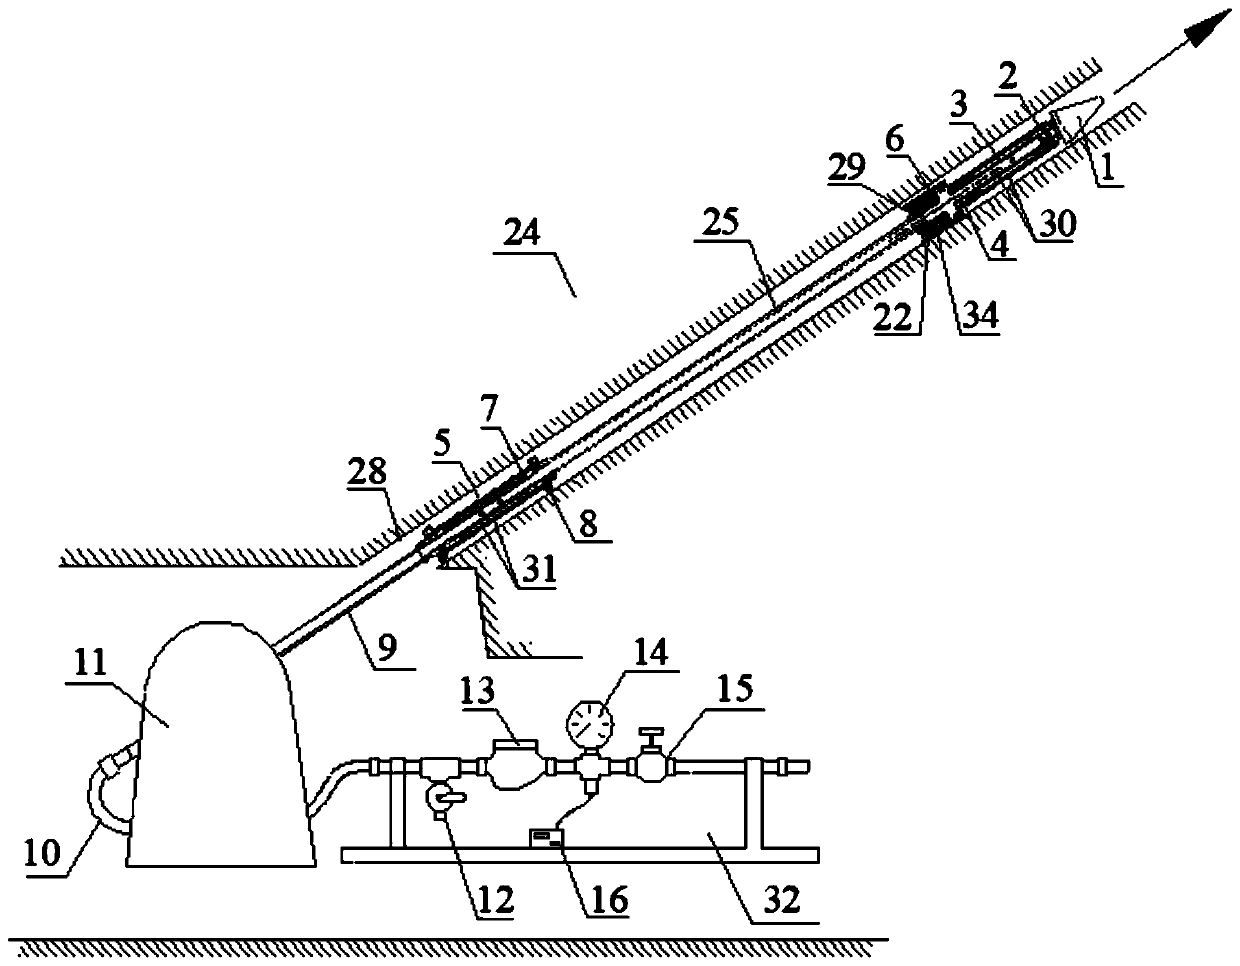 Variable pressure adjustable rock mass fracture permeability testing device